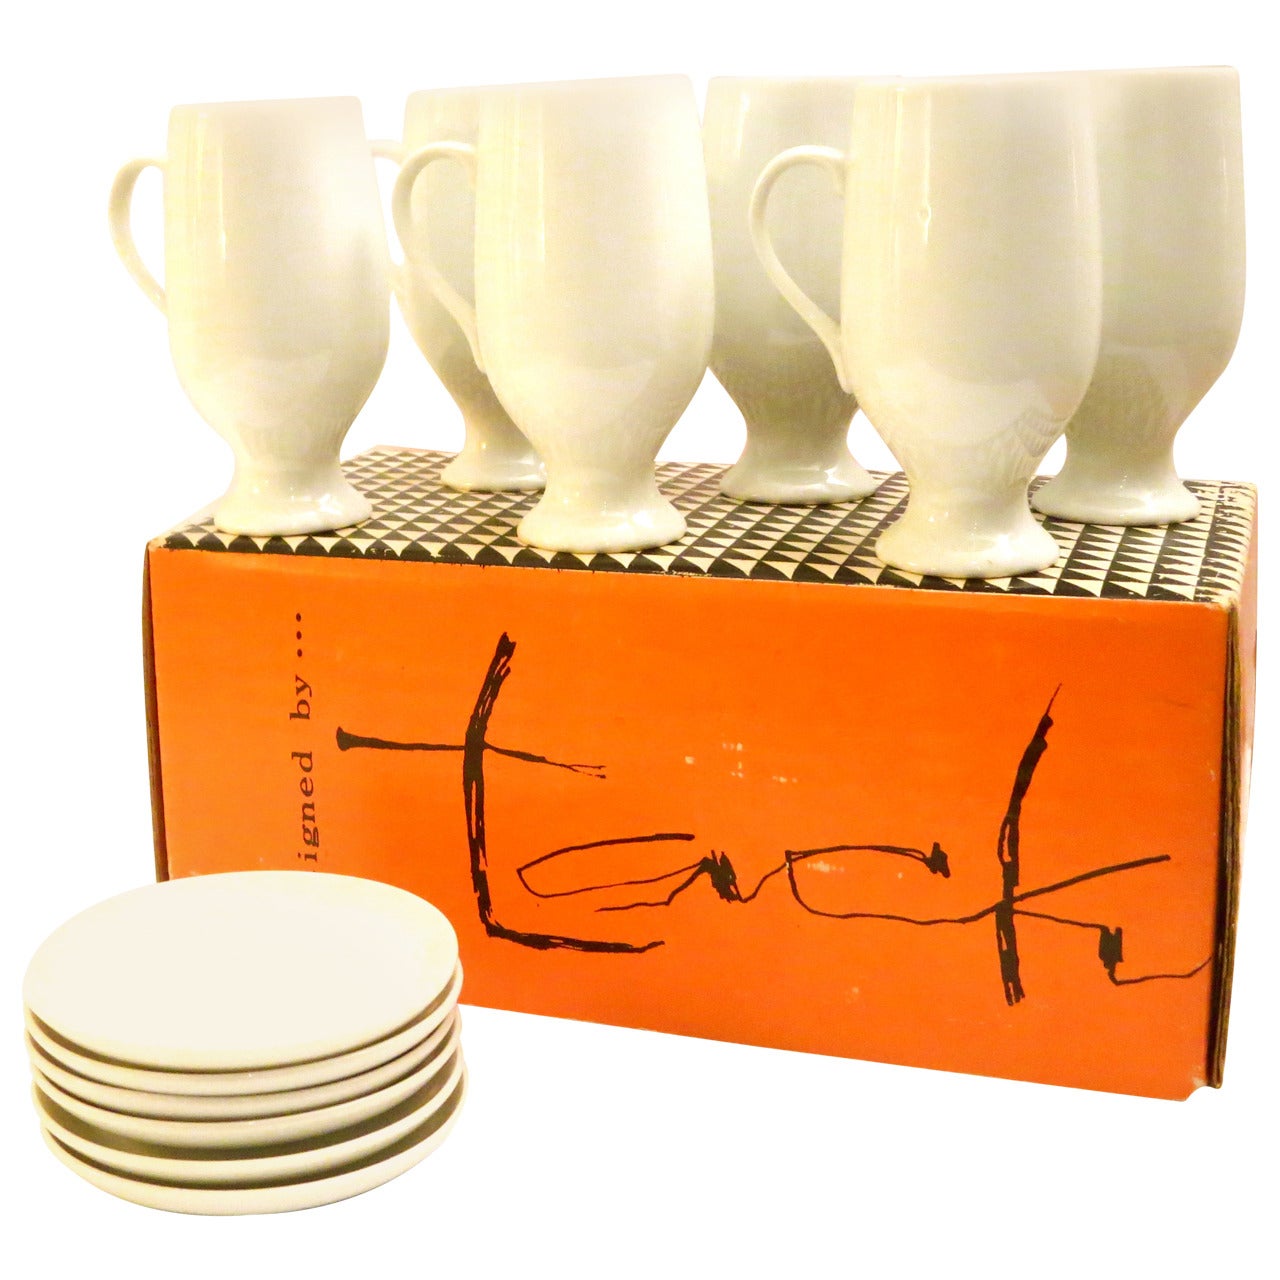 Set of Six Espresso Cups and Saucers Designed by Lagardo Tackett for Schmid